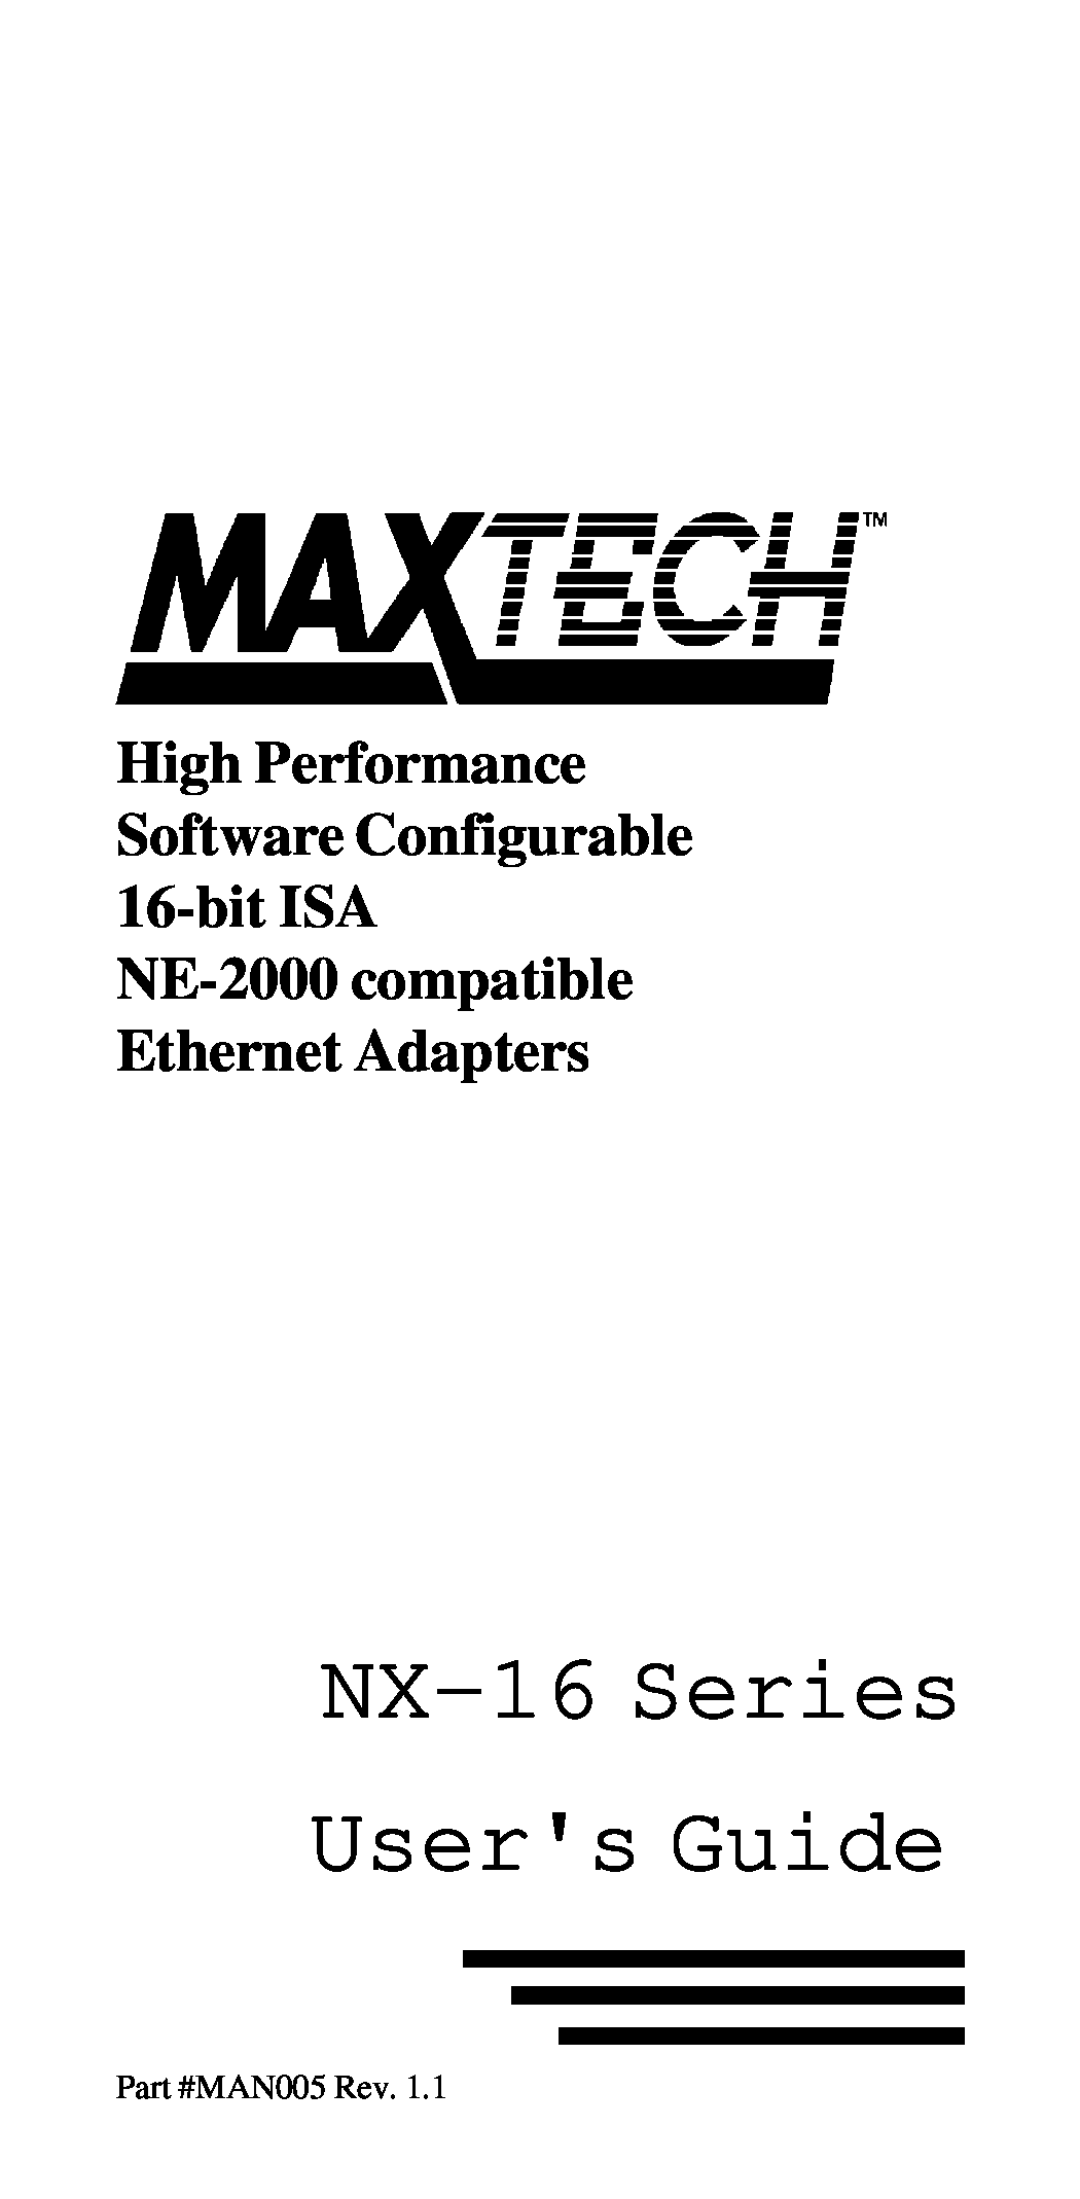 MaxTech manual NX-16 Series Users Guide, High Performance Software Configurable 16-bit ISA 